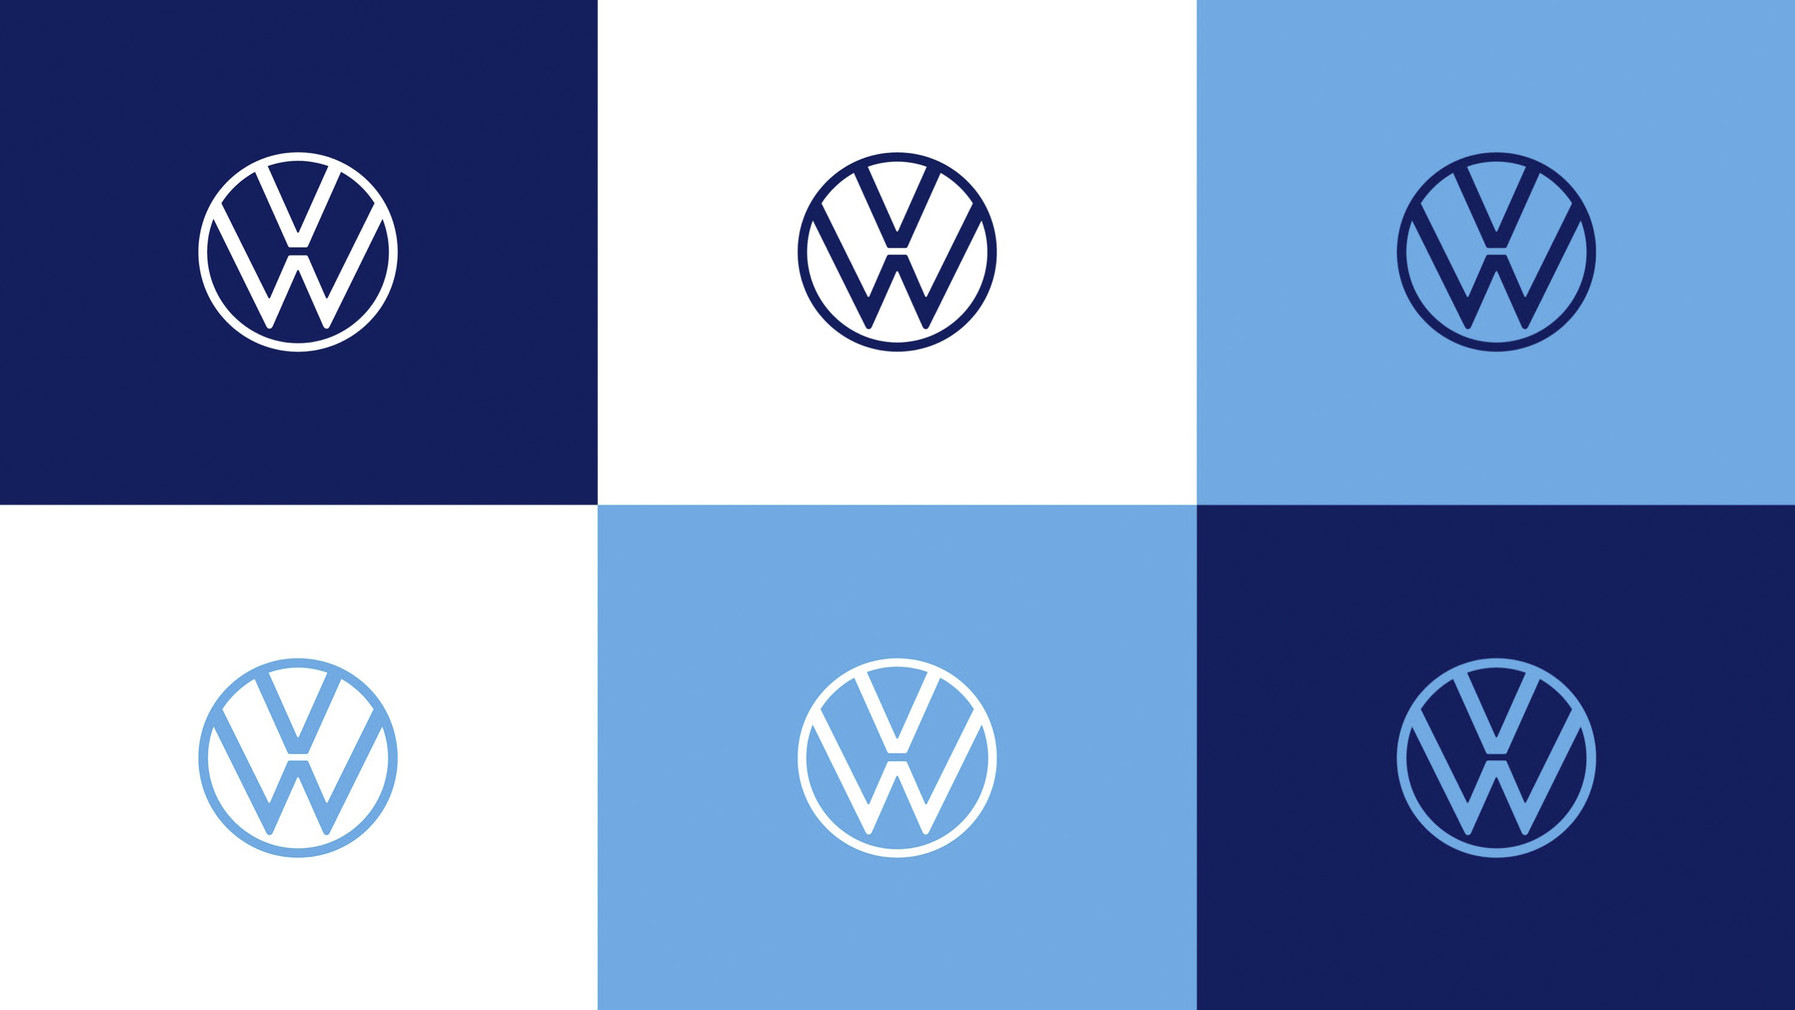 The new brand identity and logo of VW 